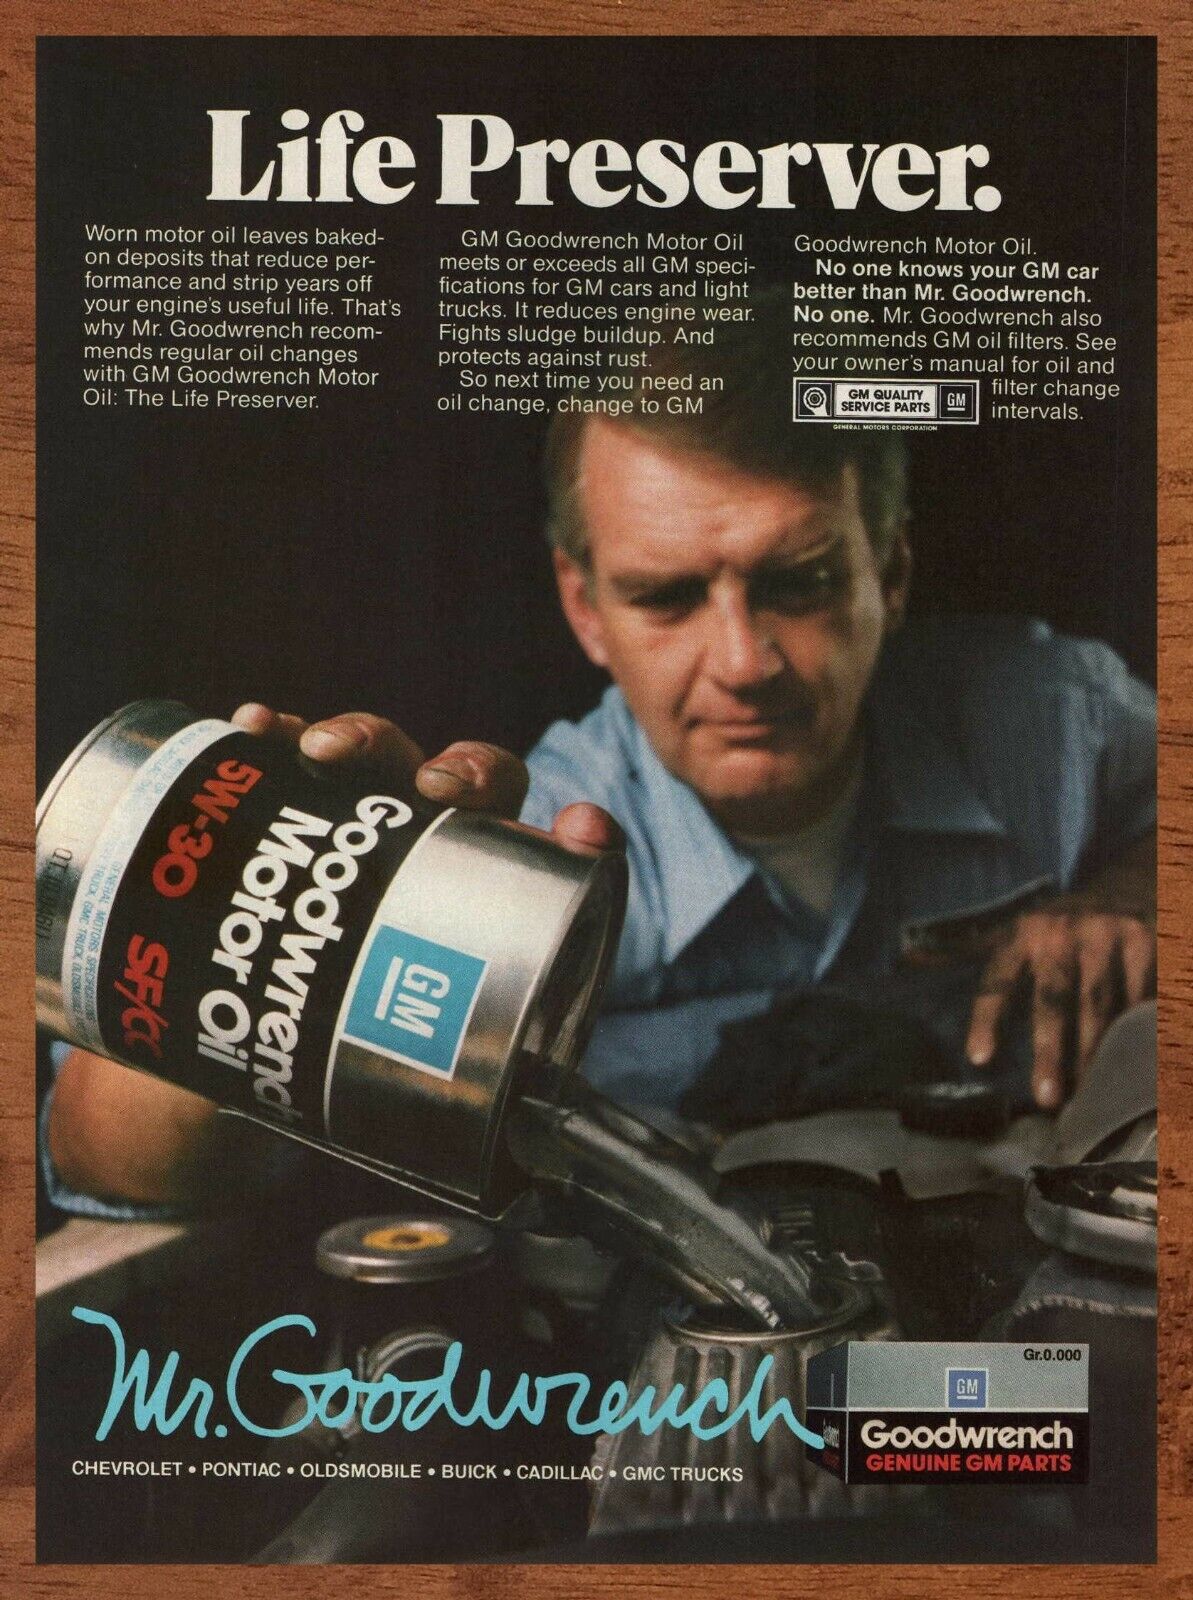 1986 GM Goodwrench Motor Oil Vintage Print Ad/Poster Car Man Cave Bar Art Décor 